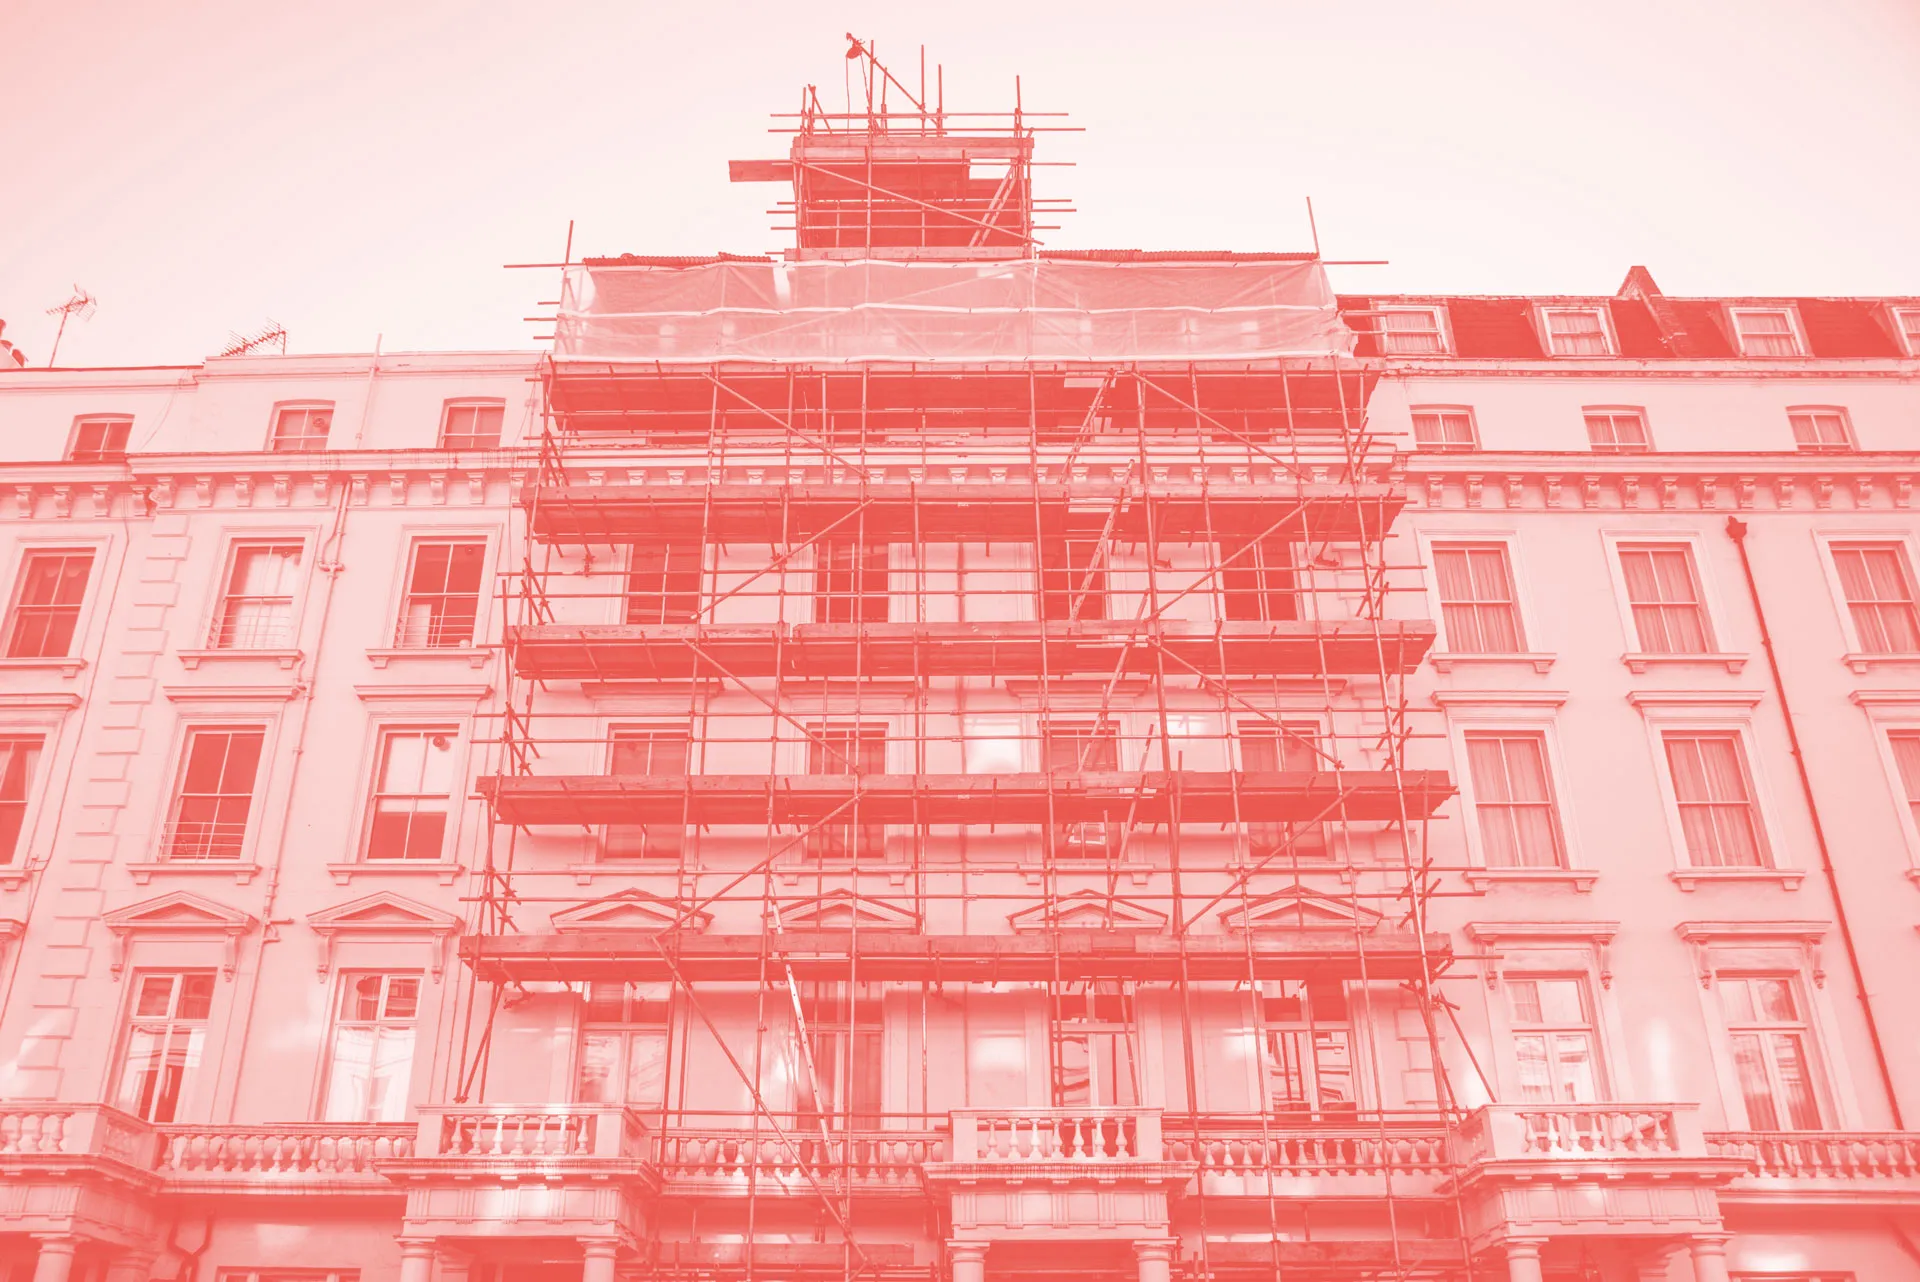 A red photo of a tall building with scaffolding around it.